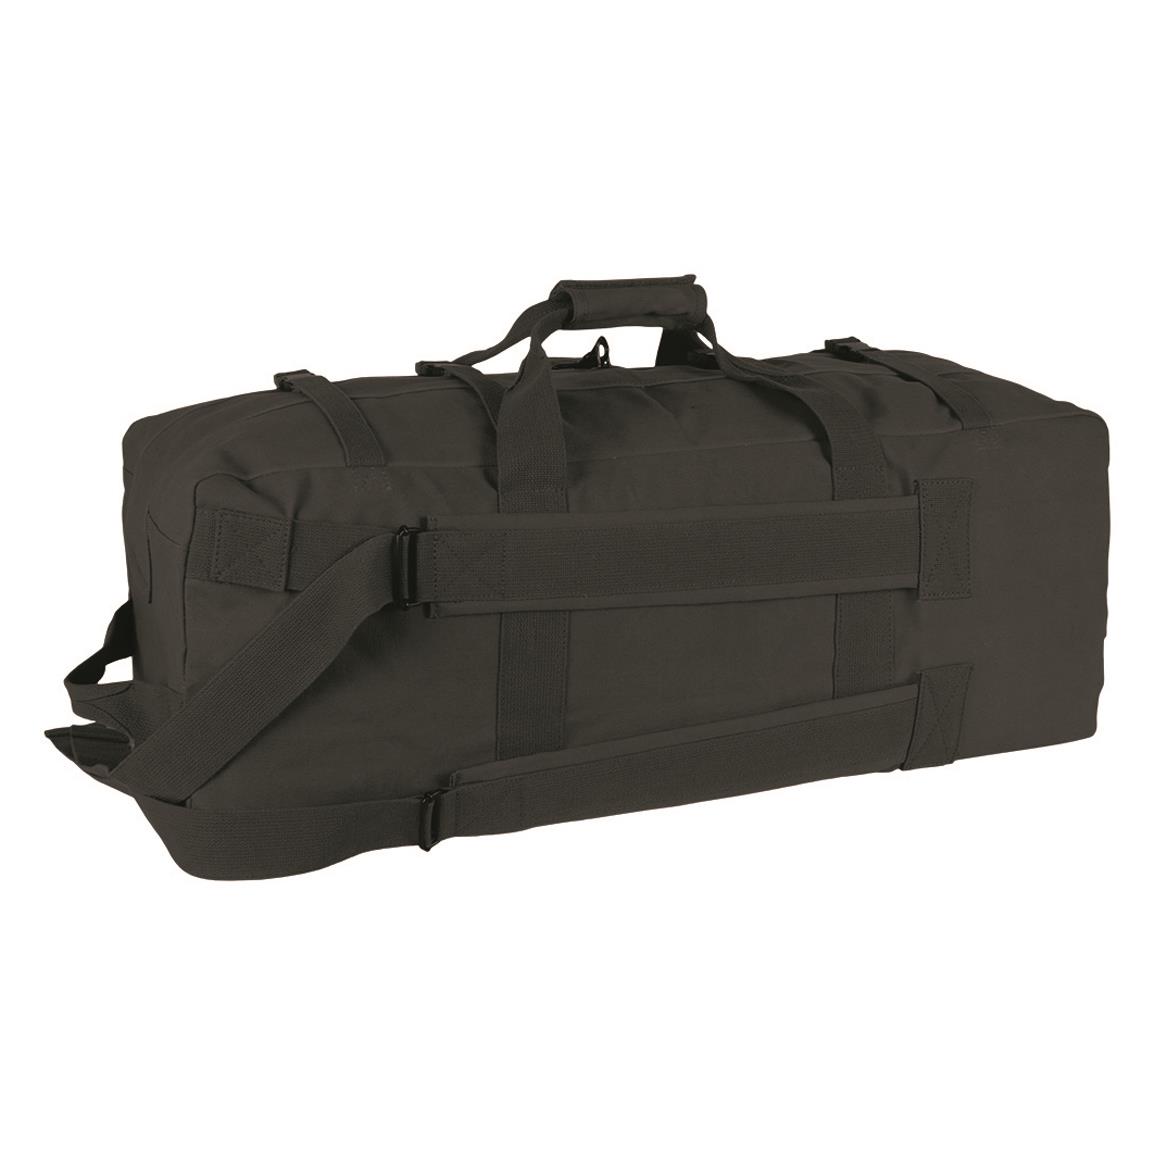 Fox Outdoor Military-Style Gen II Two-Strap Duffel Bag - 706367, Military & Camo Duffle Bags at ...